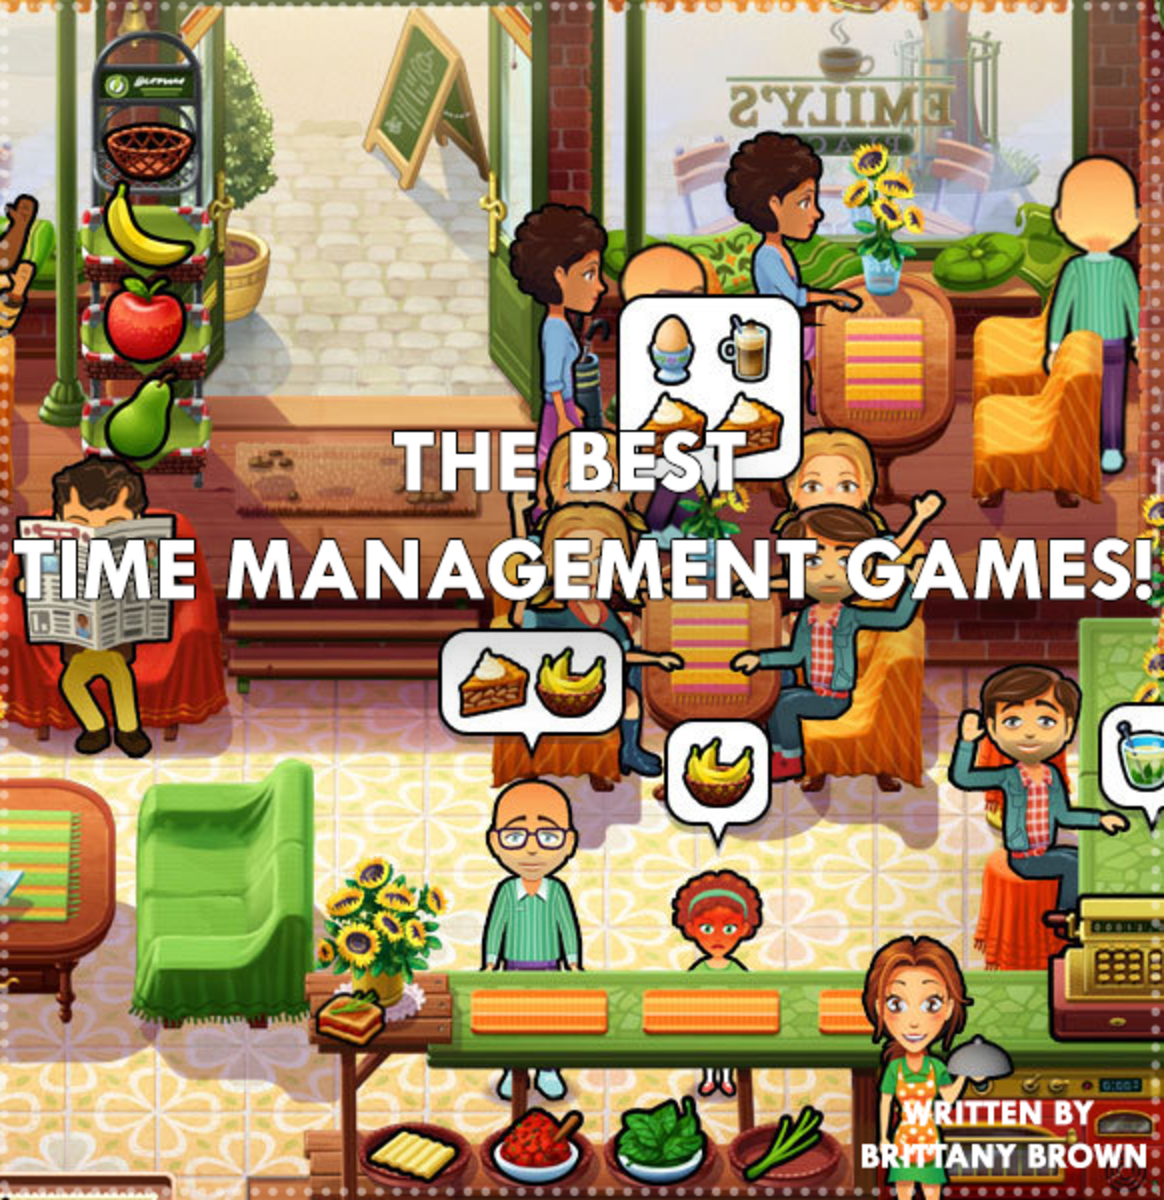 The best time management games!